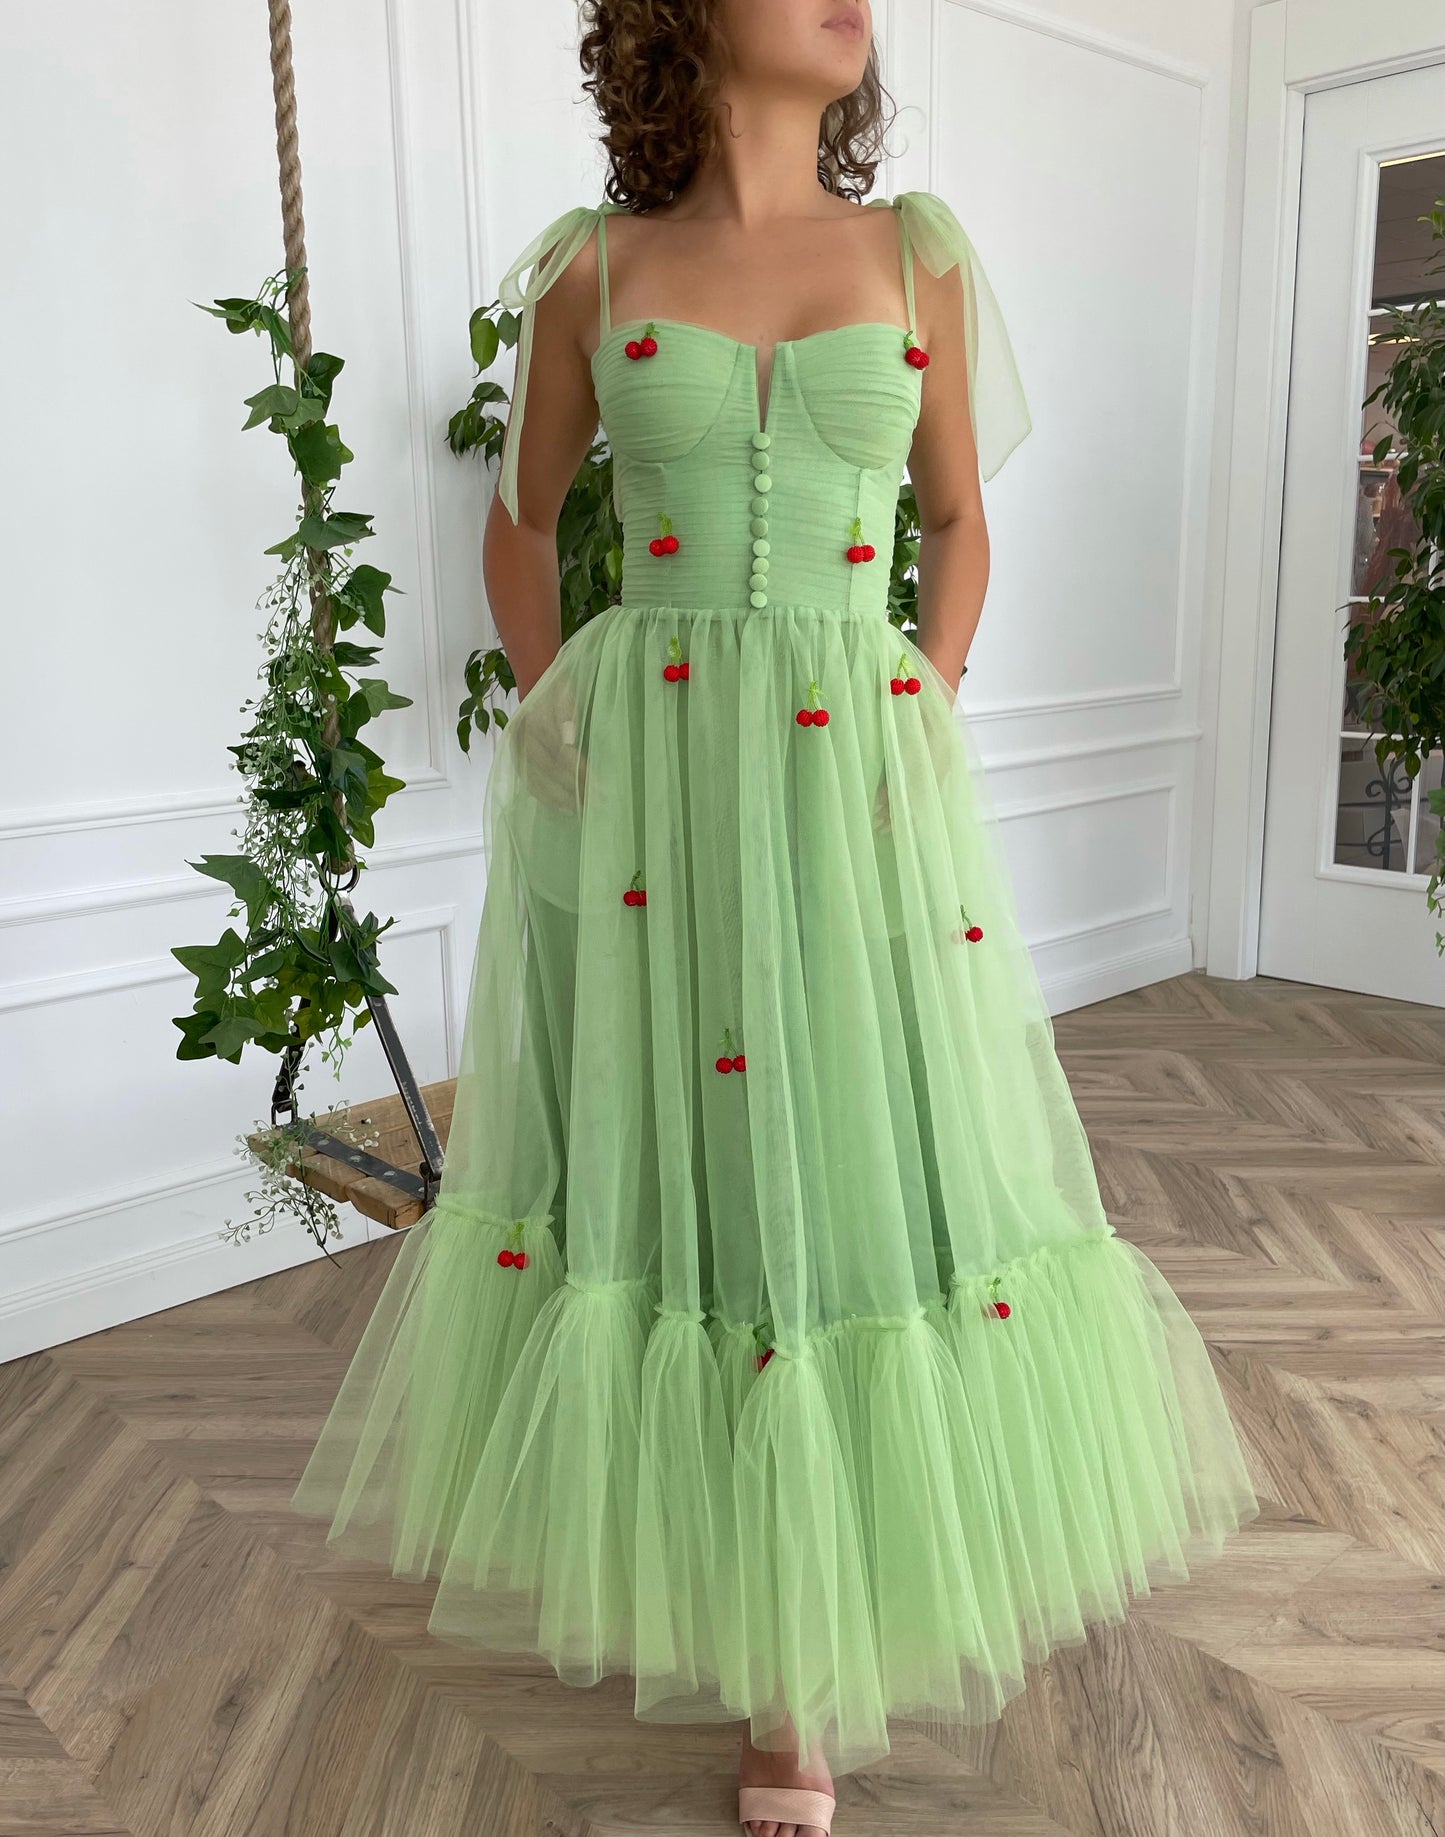 Green midi dress with bow straps and embroidered cherries